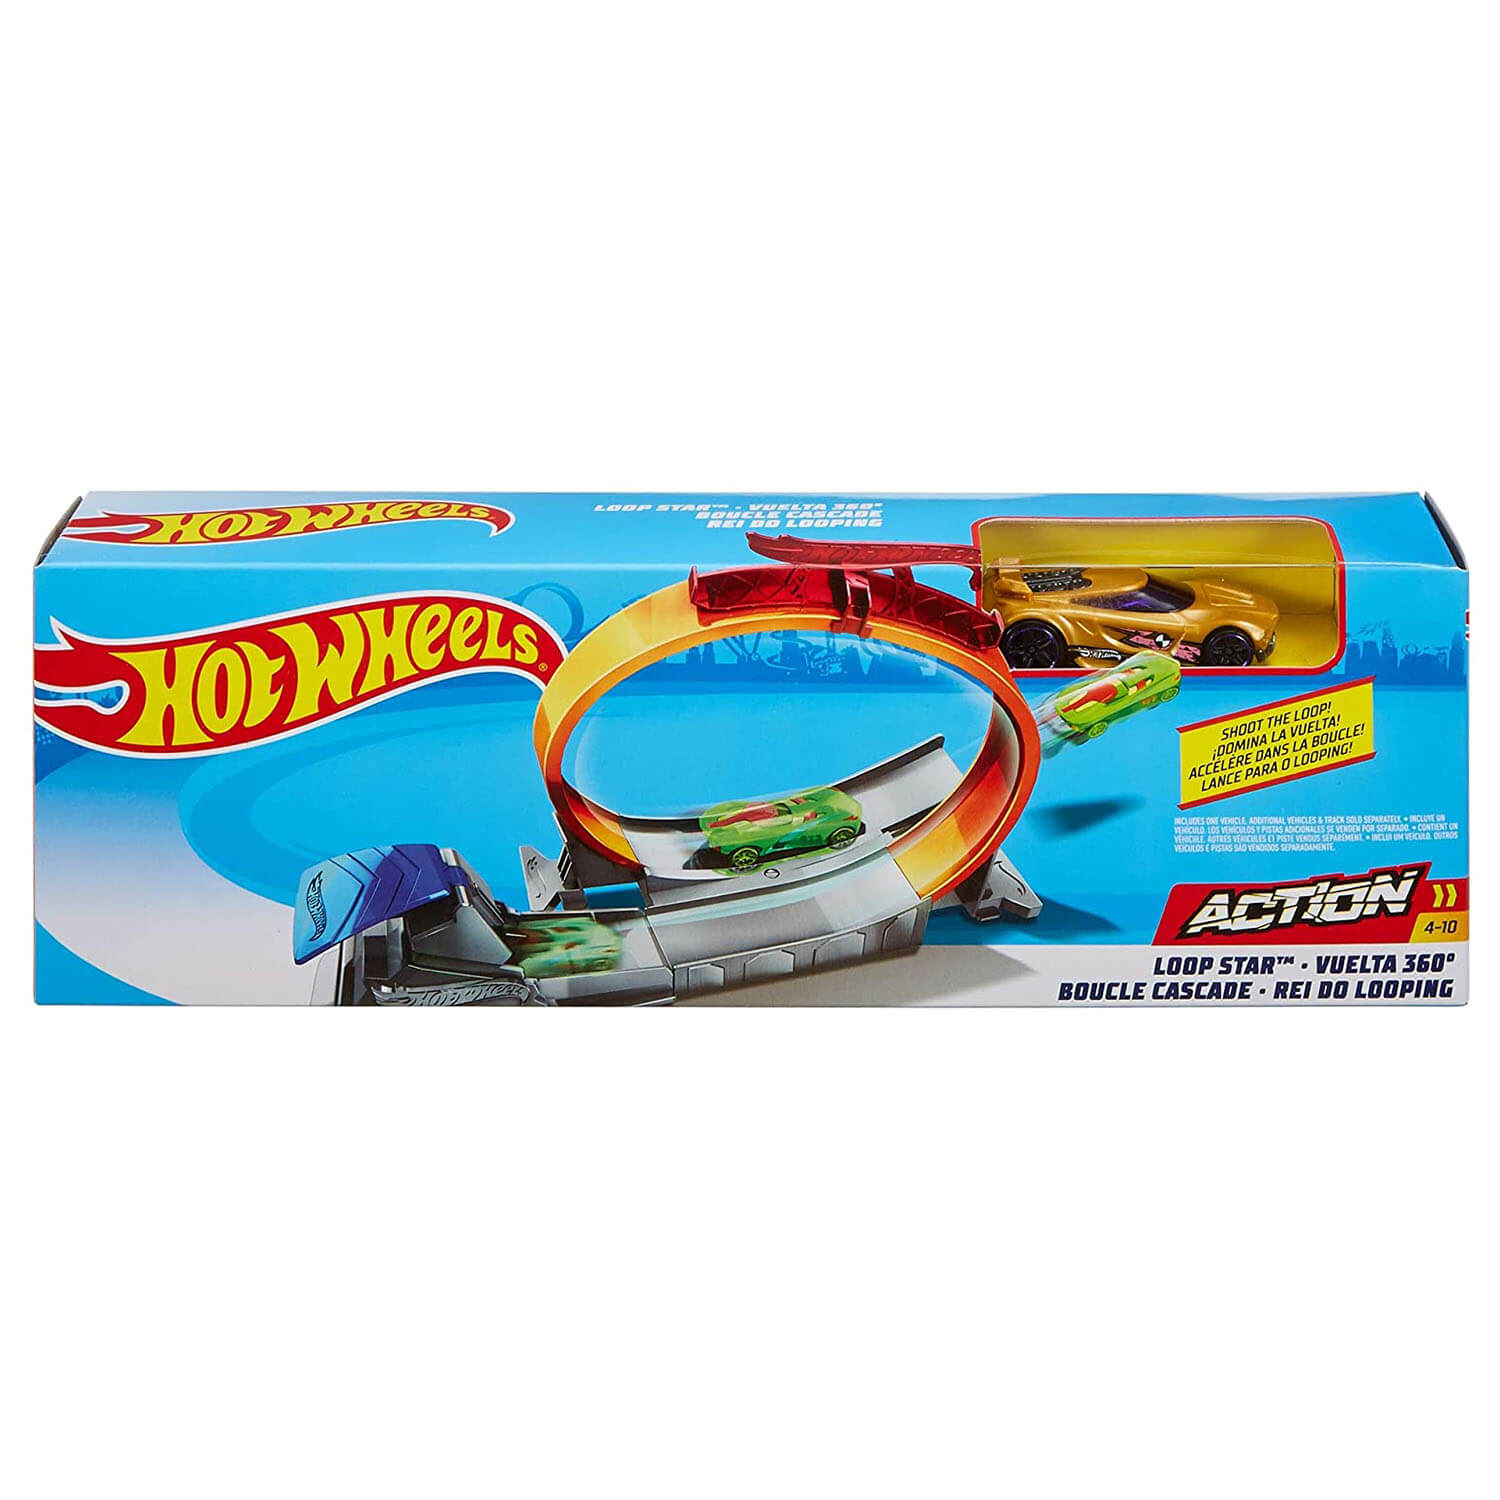 Side view of the Hot Wheels Action Loop Star Playset.